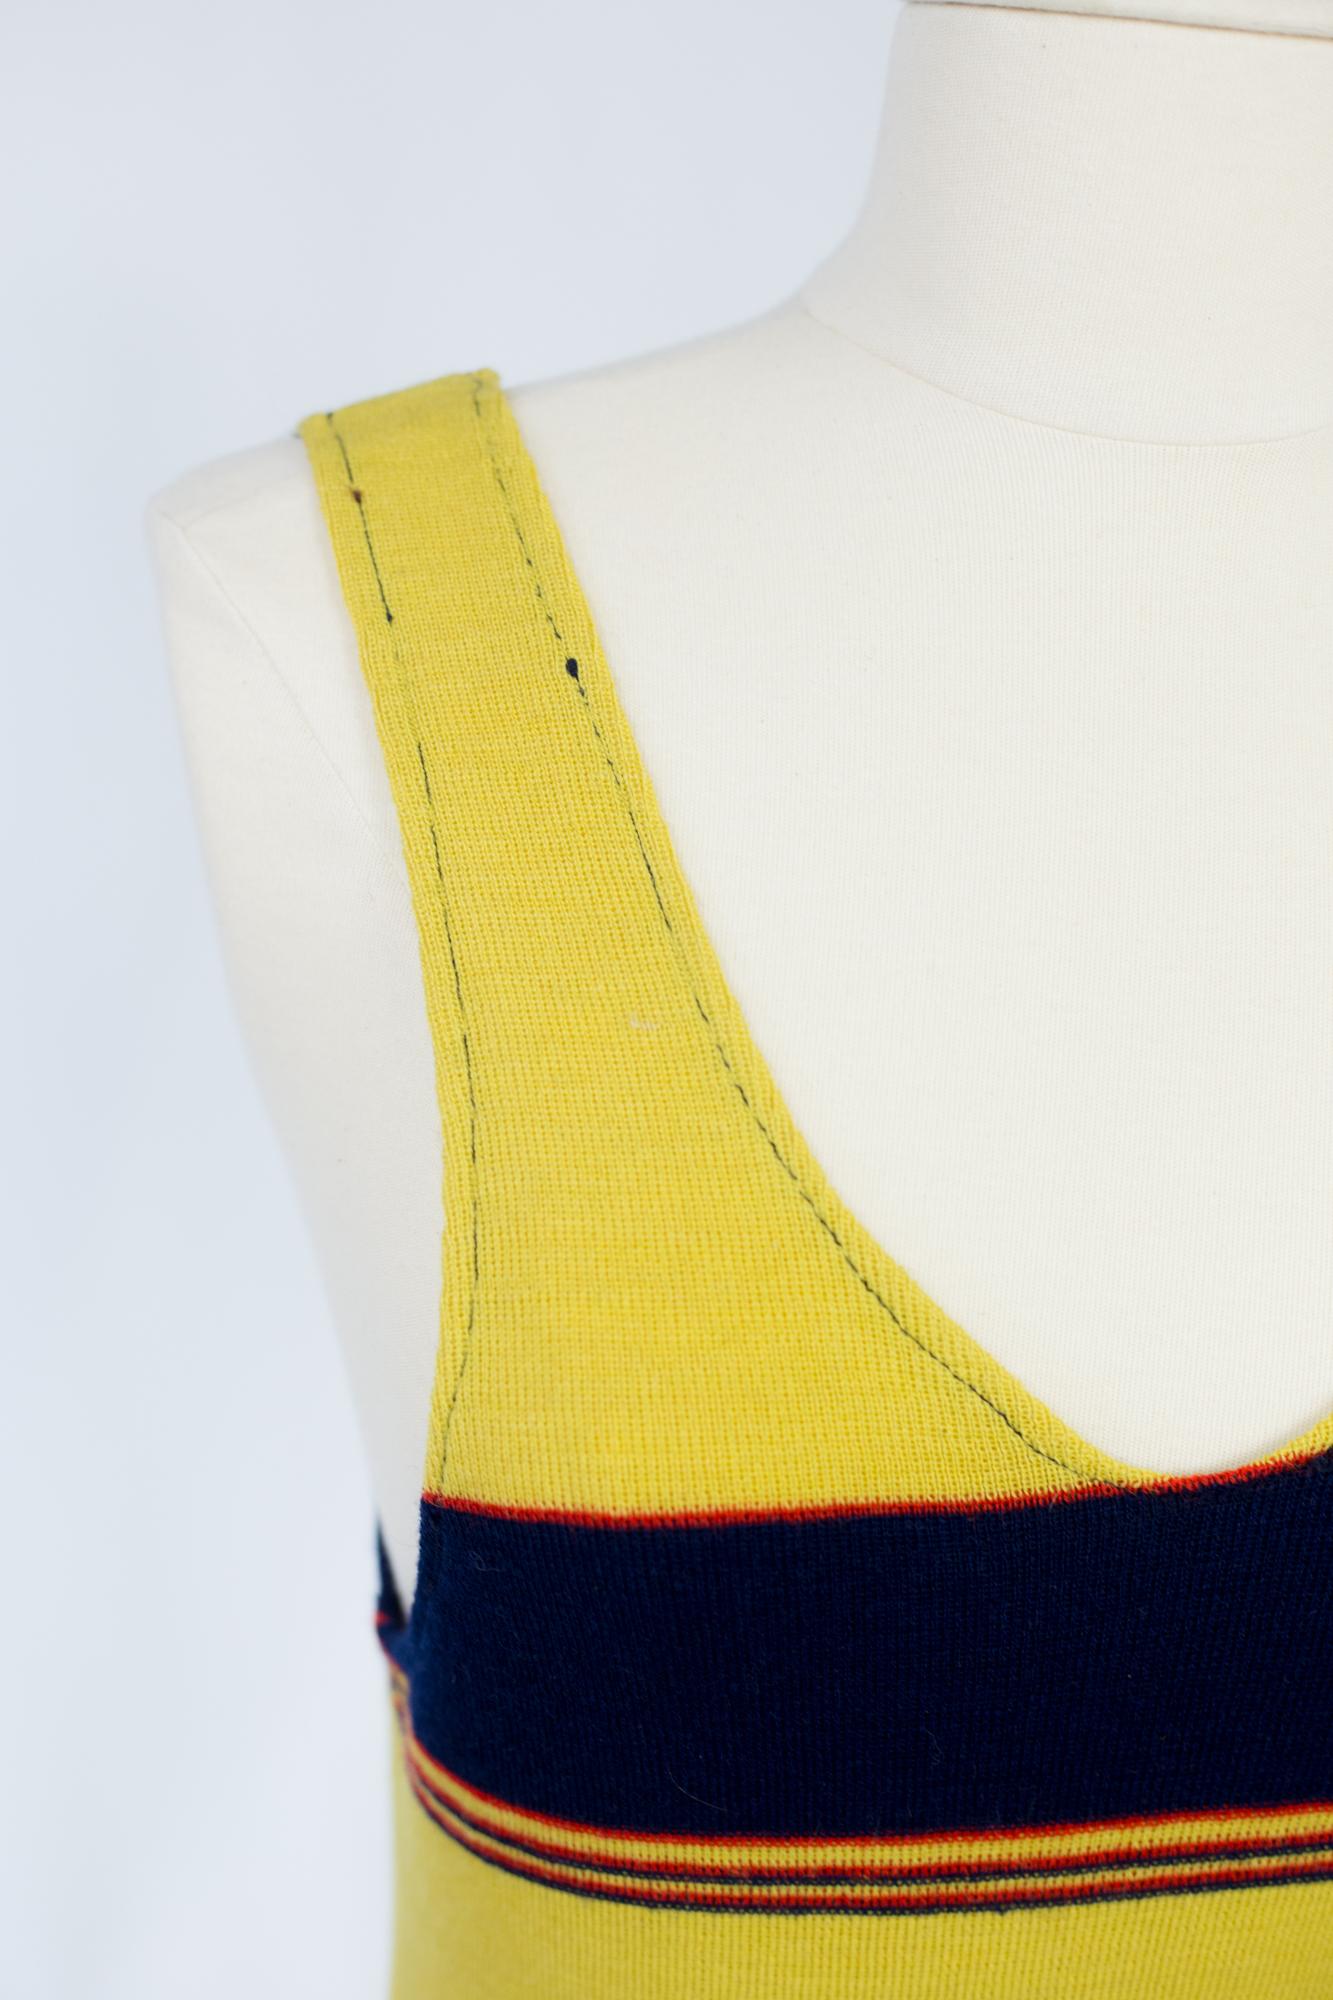 Wool knit Art Deco bathing suit in Chanel or Patou Style- France Circa 1925 For Sale 3